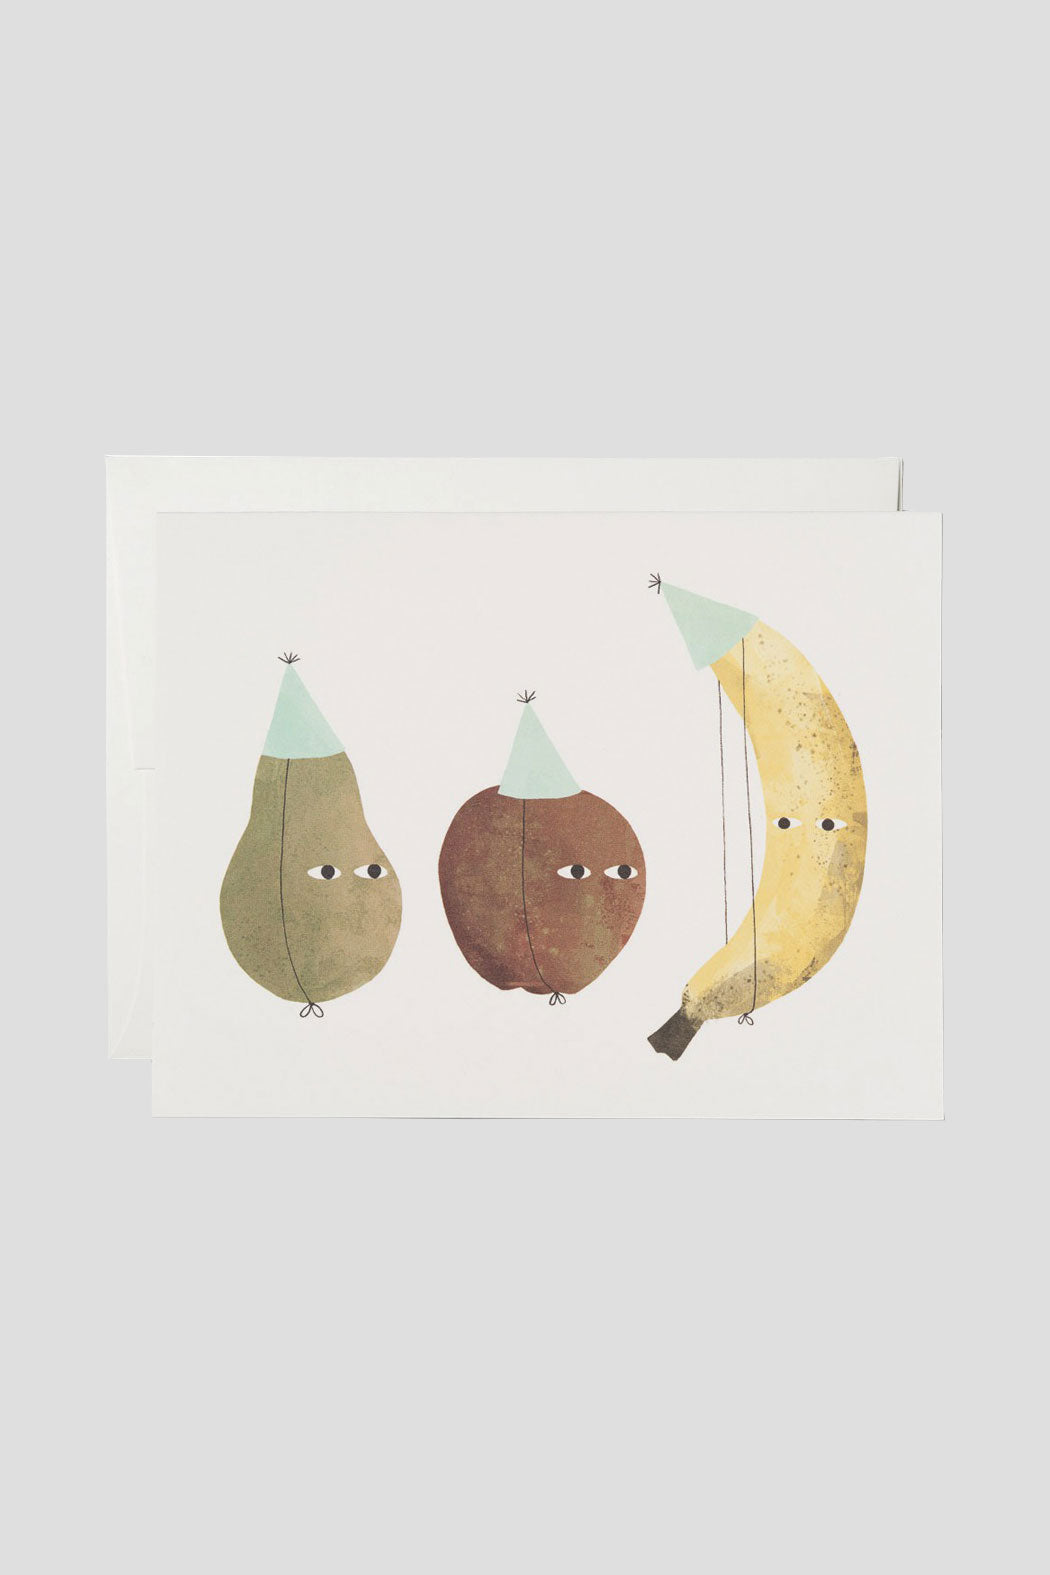 Fruit Party Card